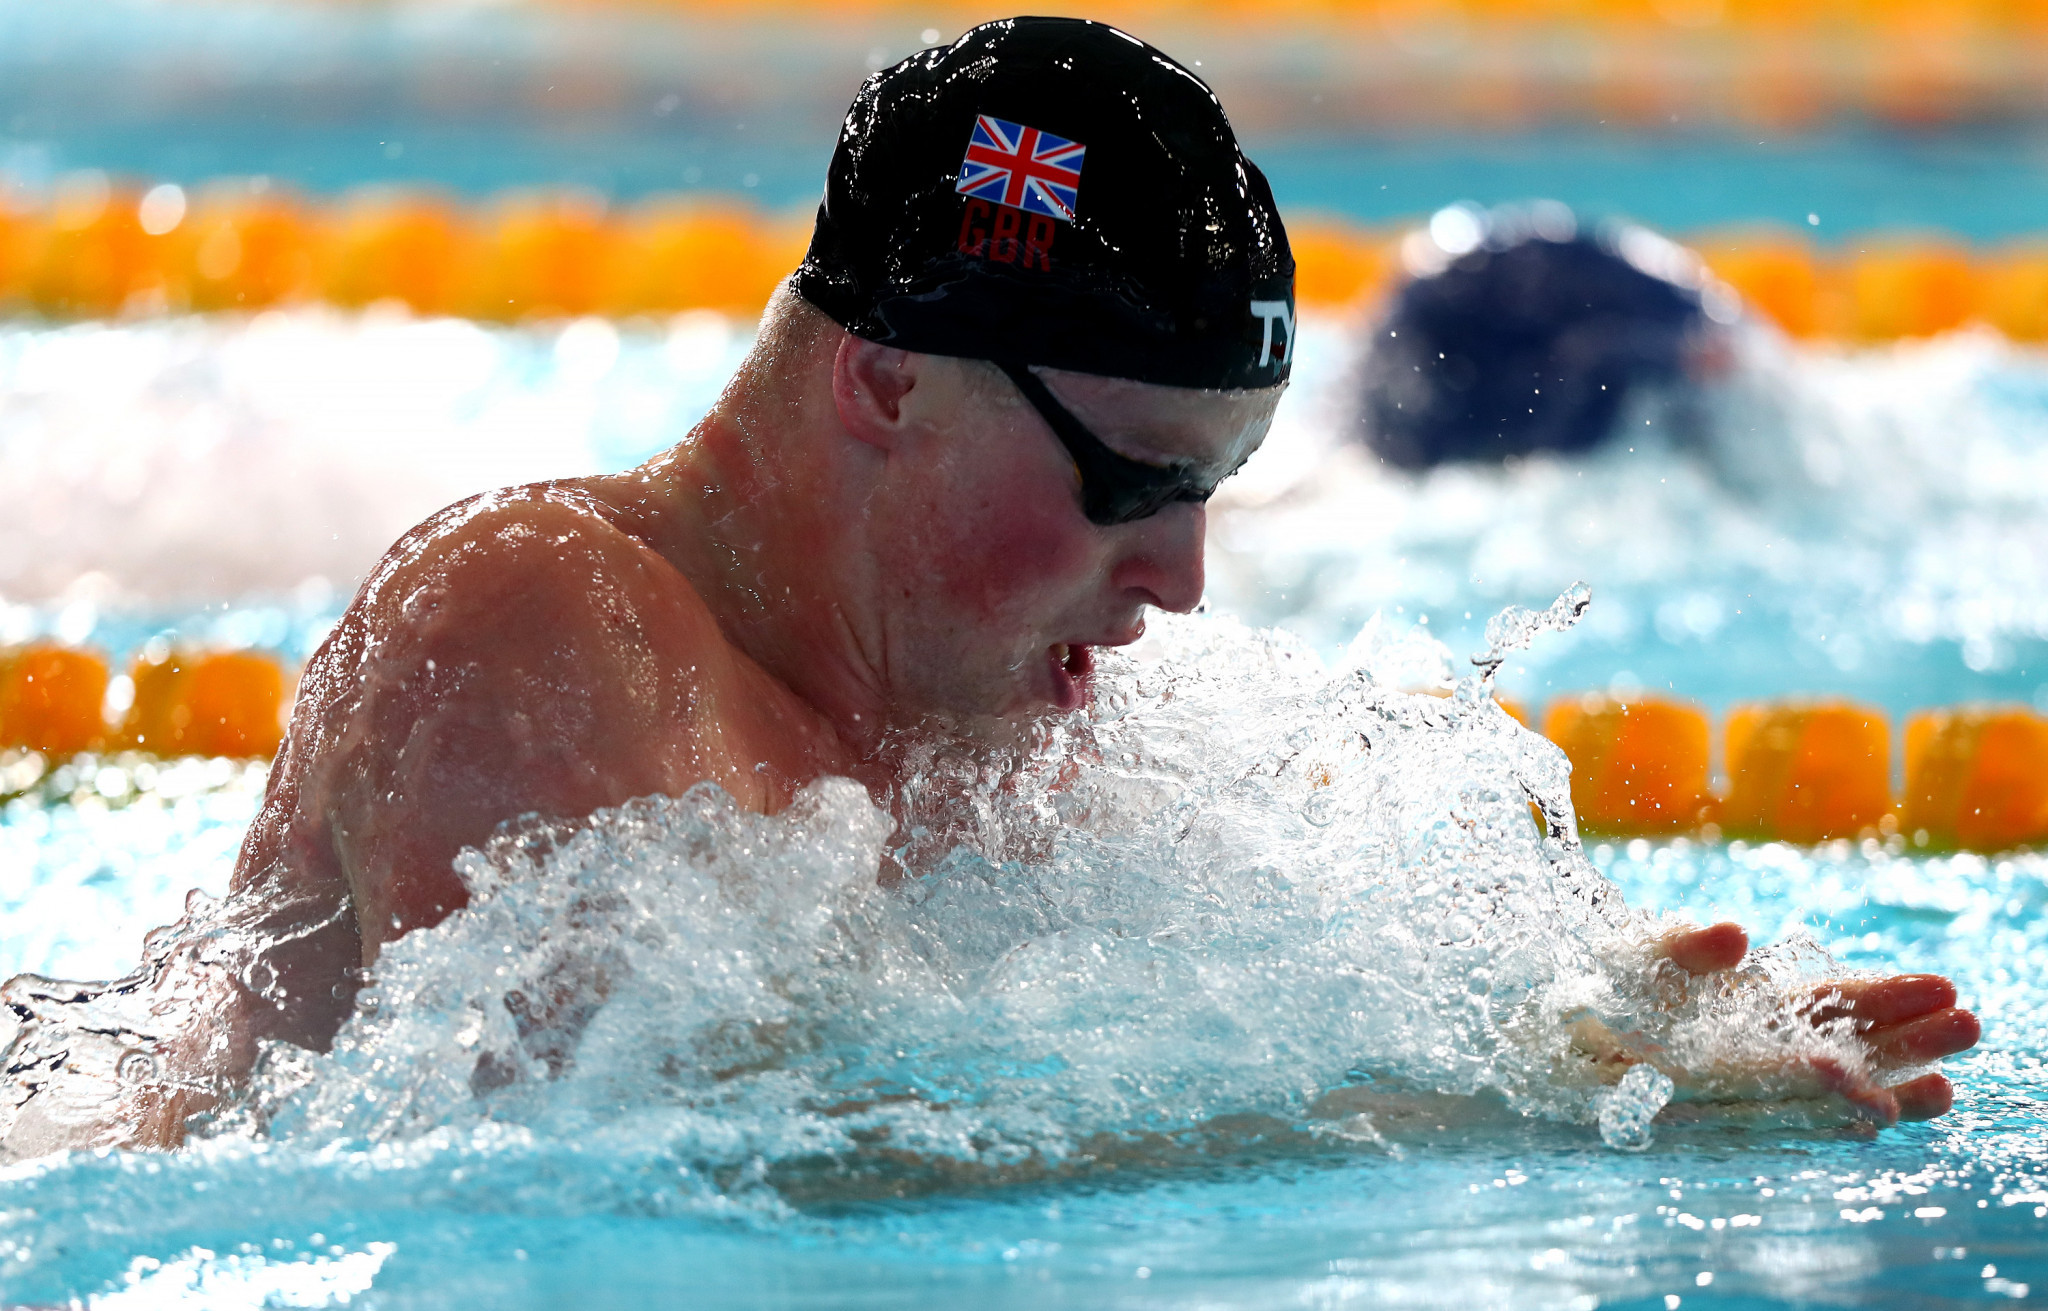 Britain's Adam Peaty was among the top names set to compete in the 2018 Energy for Swim meeting in Turin later this month before it was cancelled after FINA threatened to ban anyone who took part ©Getty Images